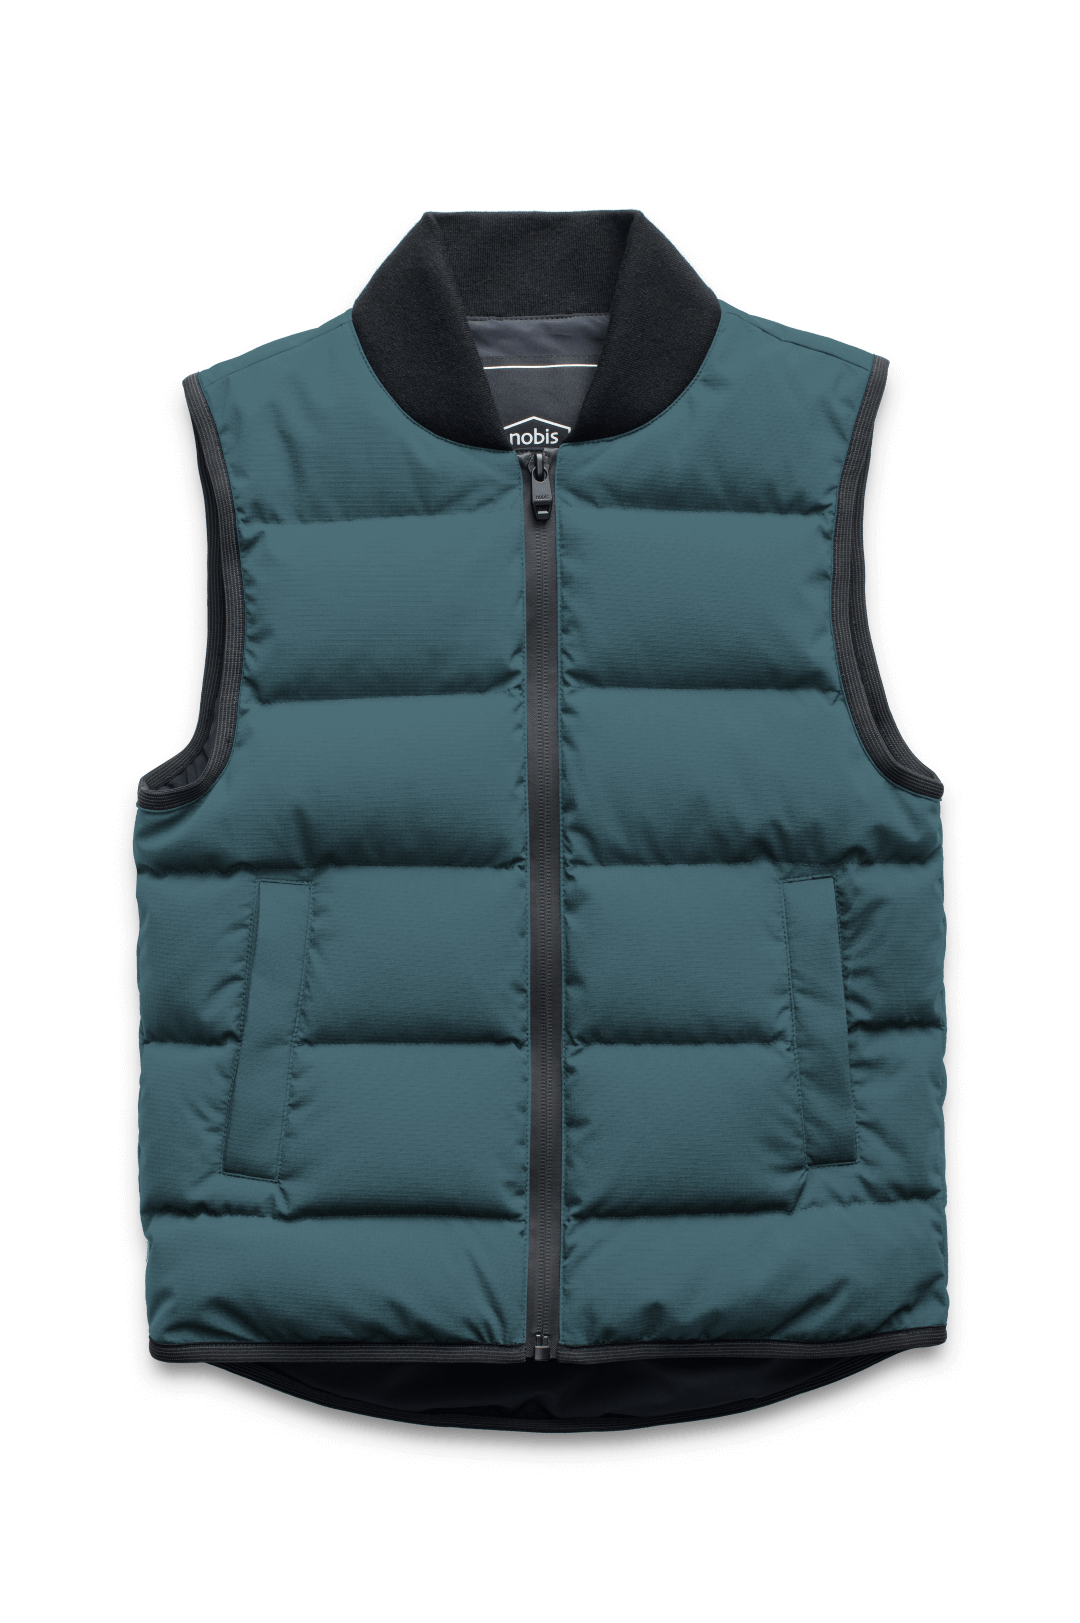 Little Pluto Kids Mid Layer Vest in hip length, Canadian duck down insulation, ribbed collar, two-way front zipper, and quilted body, in Pine